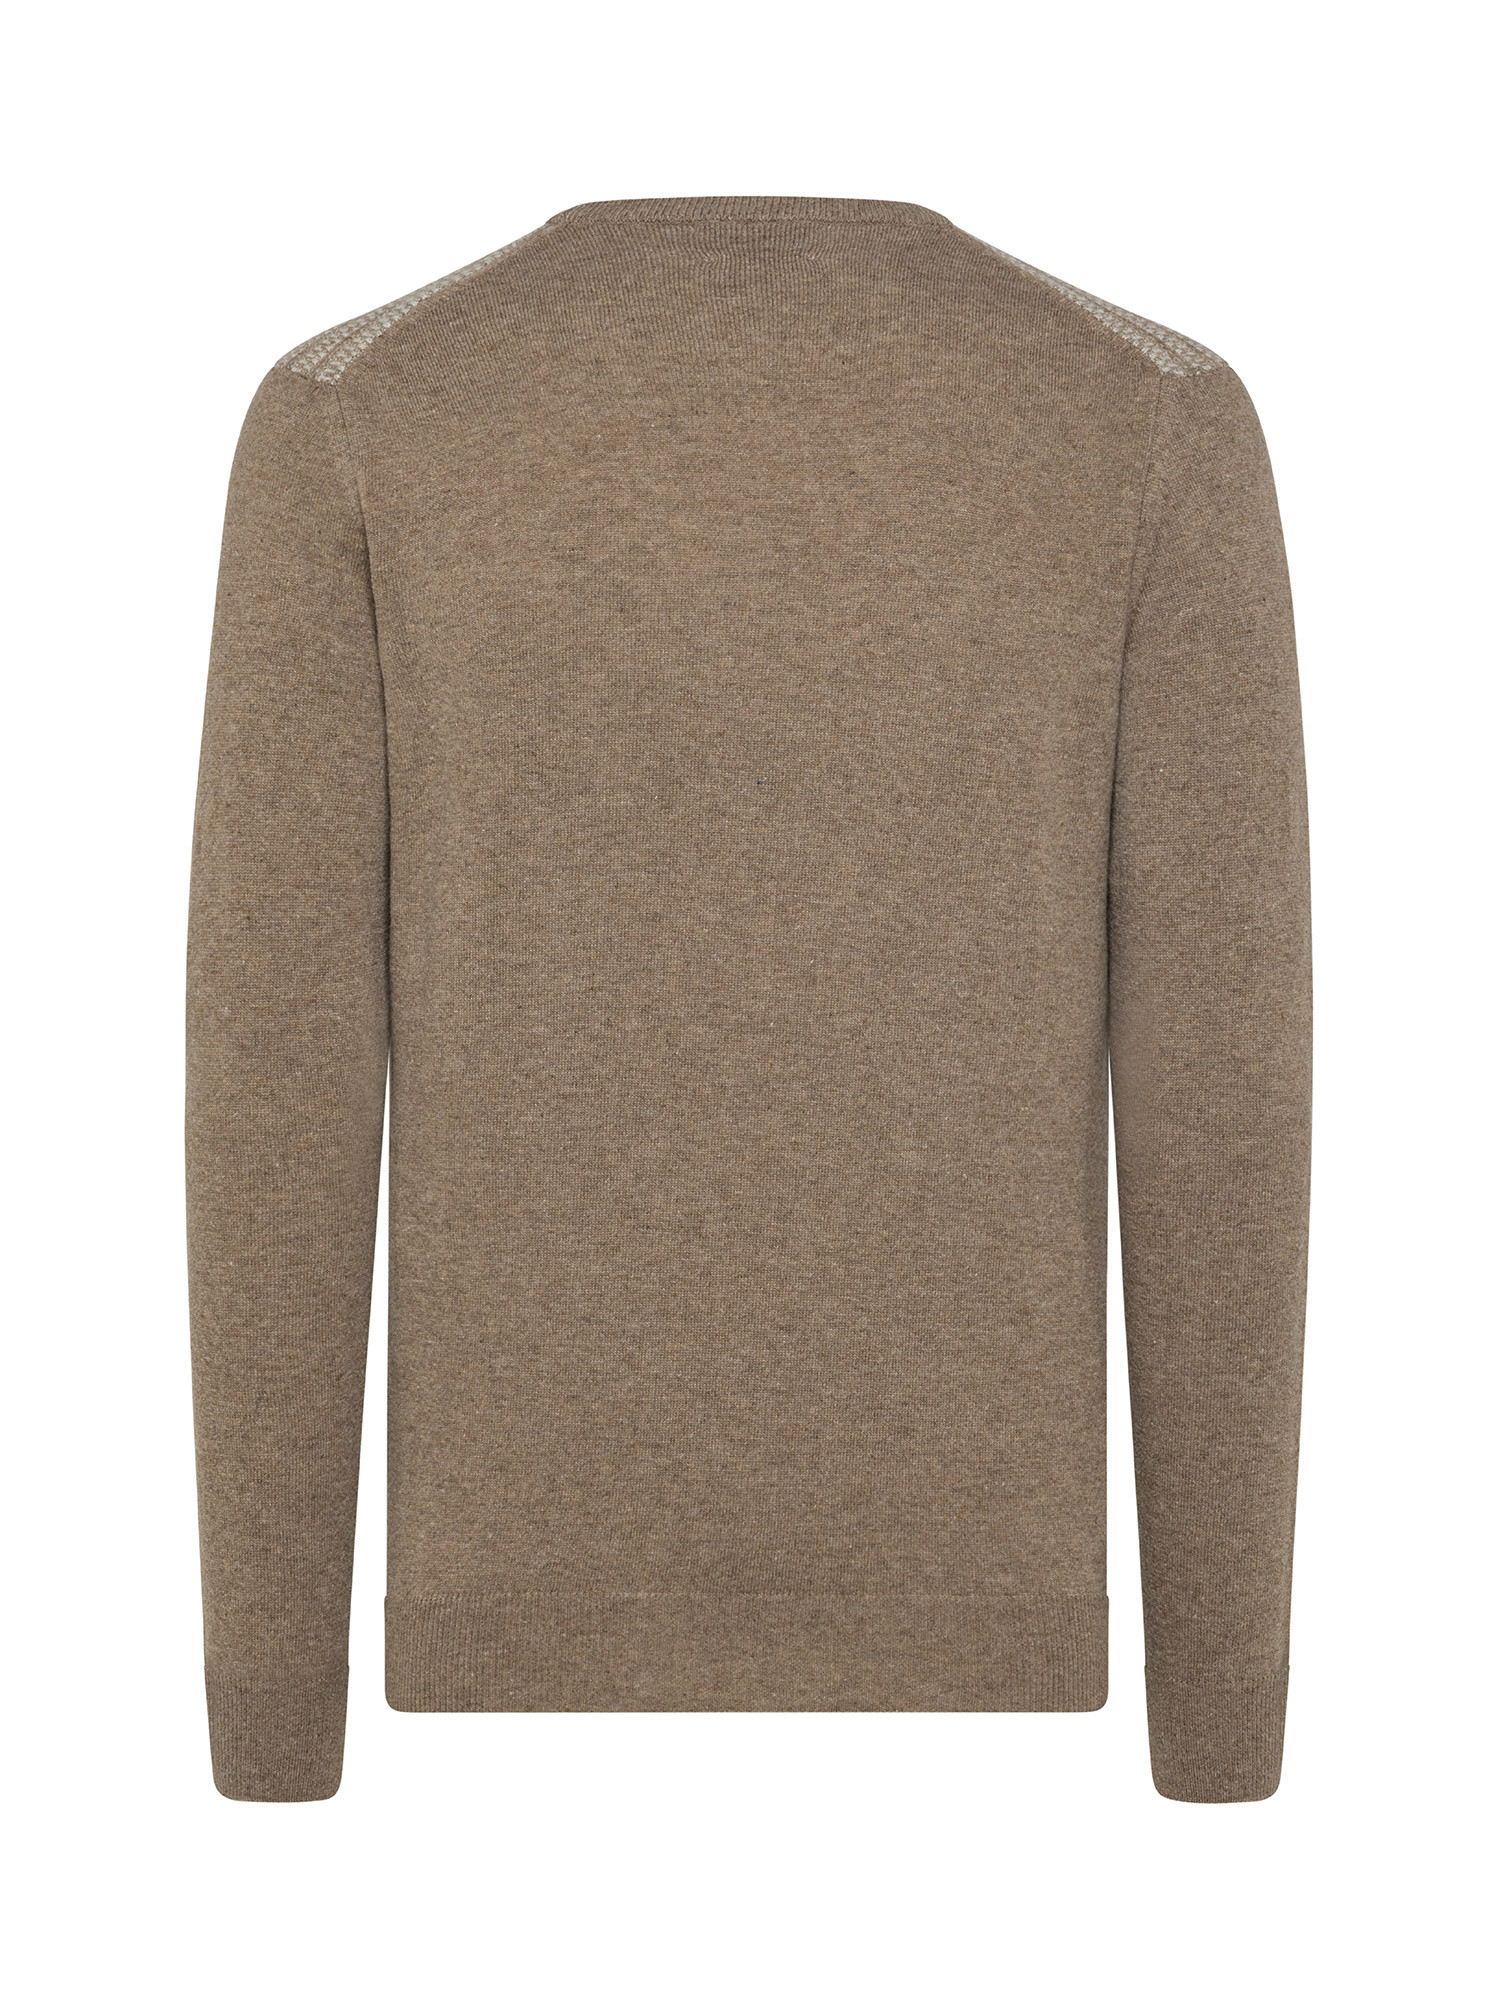 Crewneck sweater with noble fibers, Beige, large image number 1